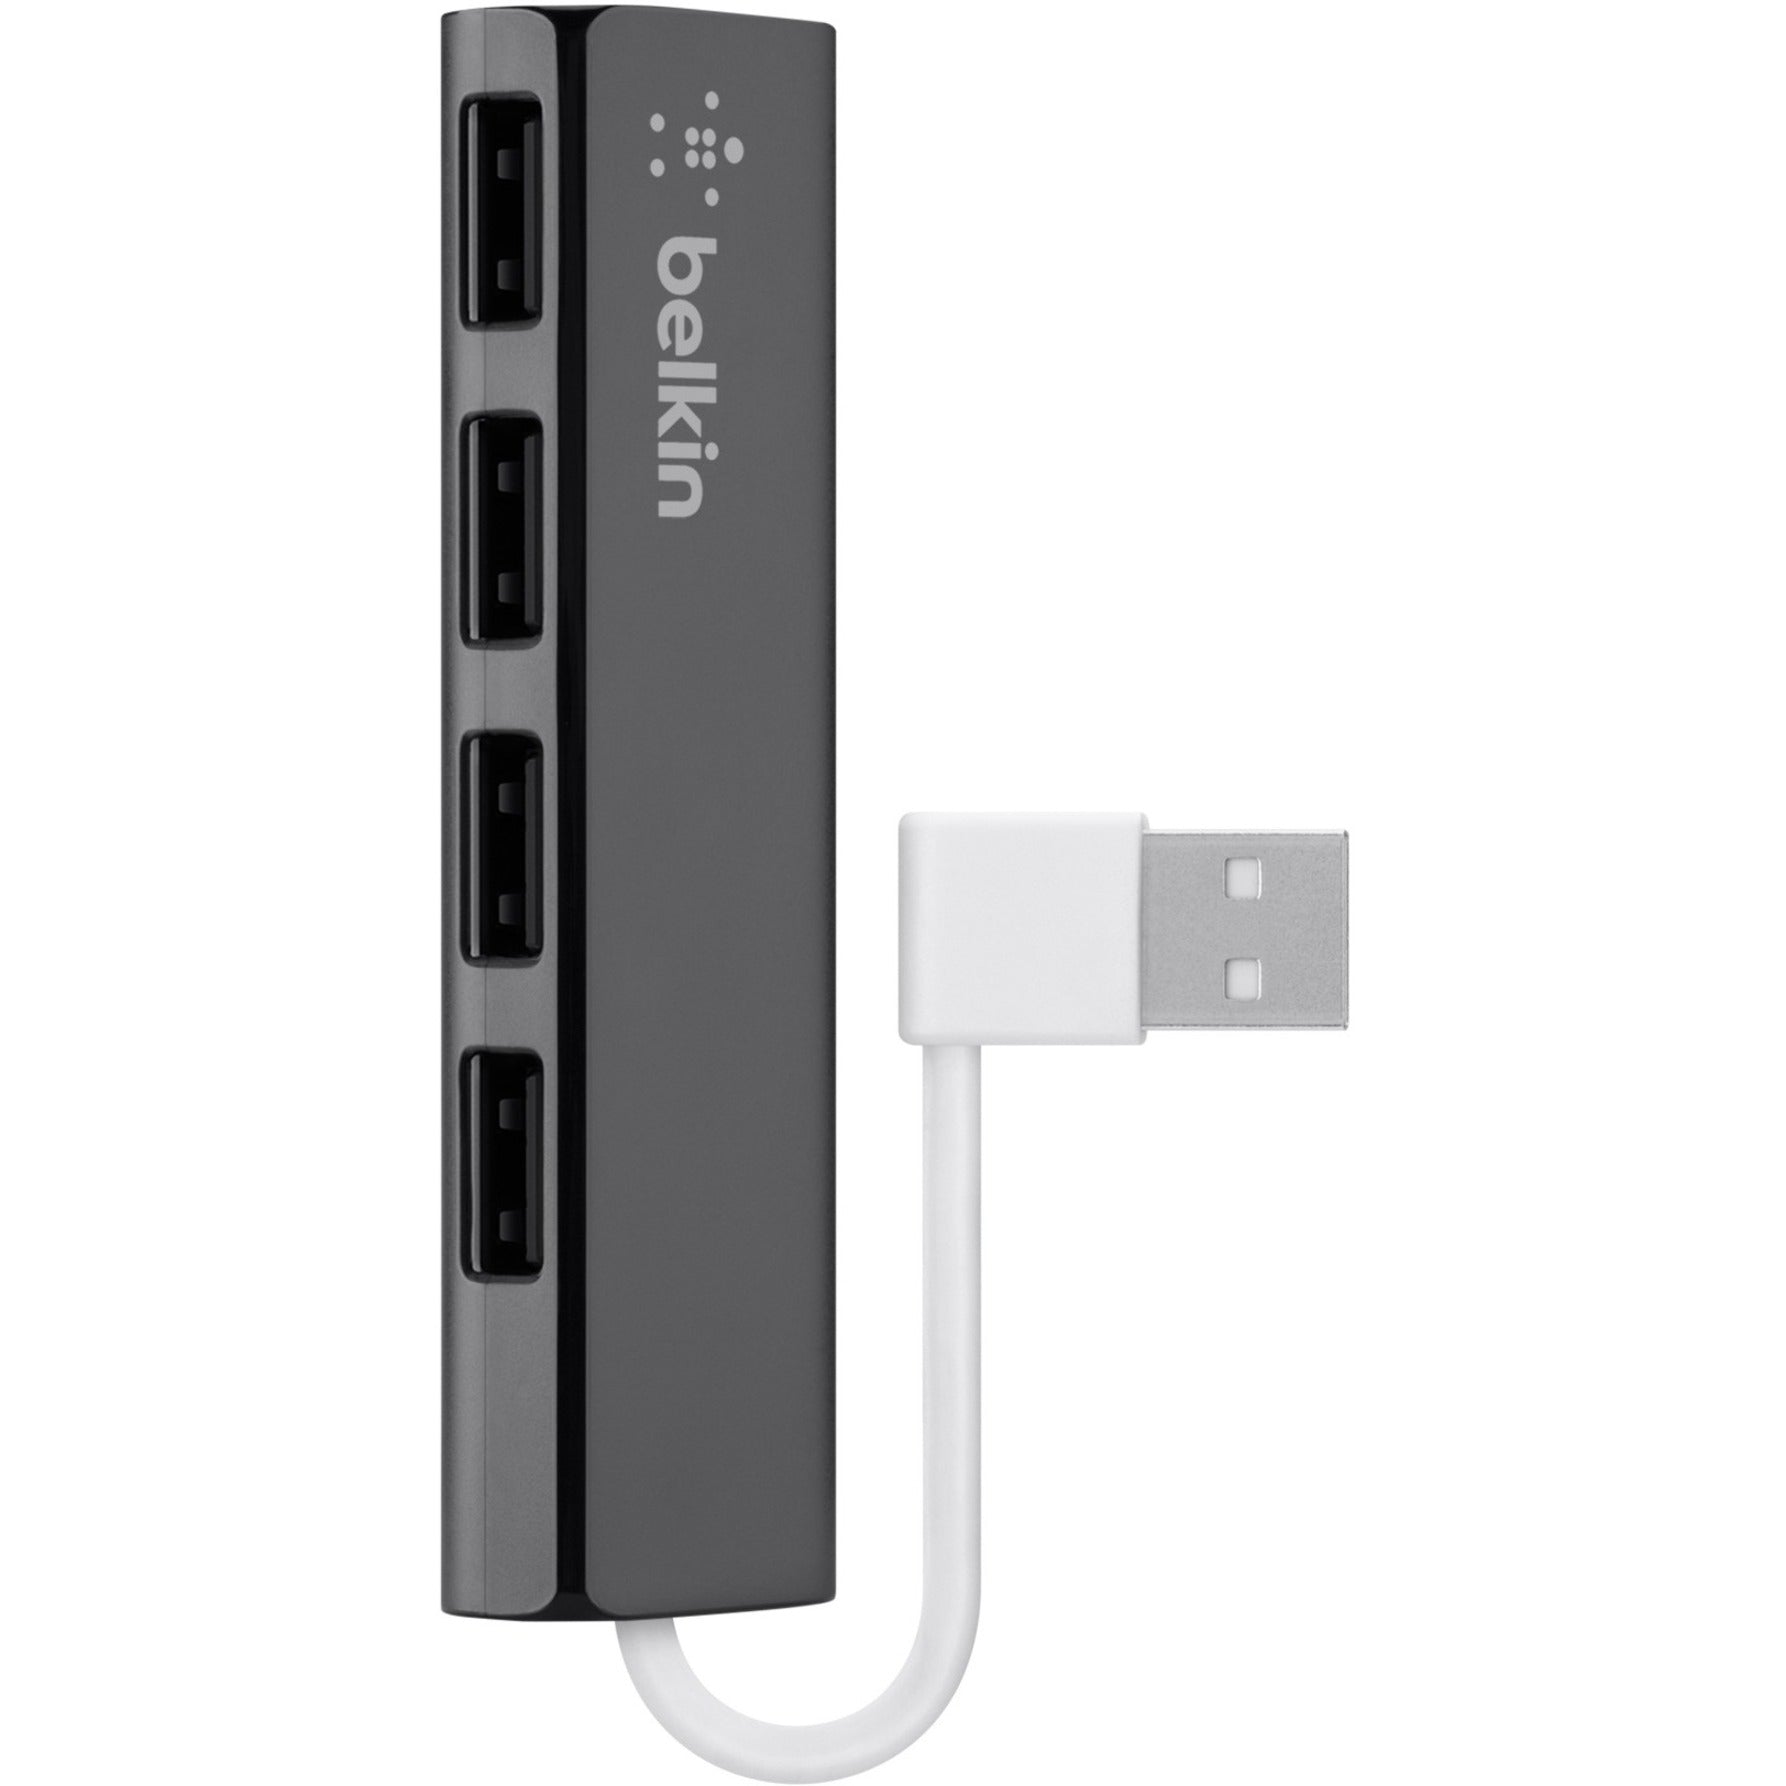 Belkin F4U042BT Ultra-Slim 4-port USB Hub, Compact and Convenient USB Expansion for PC and Mac